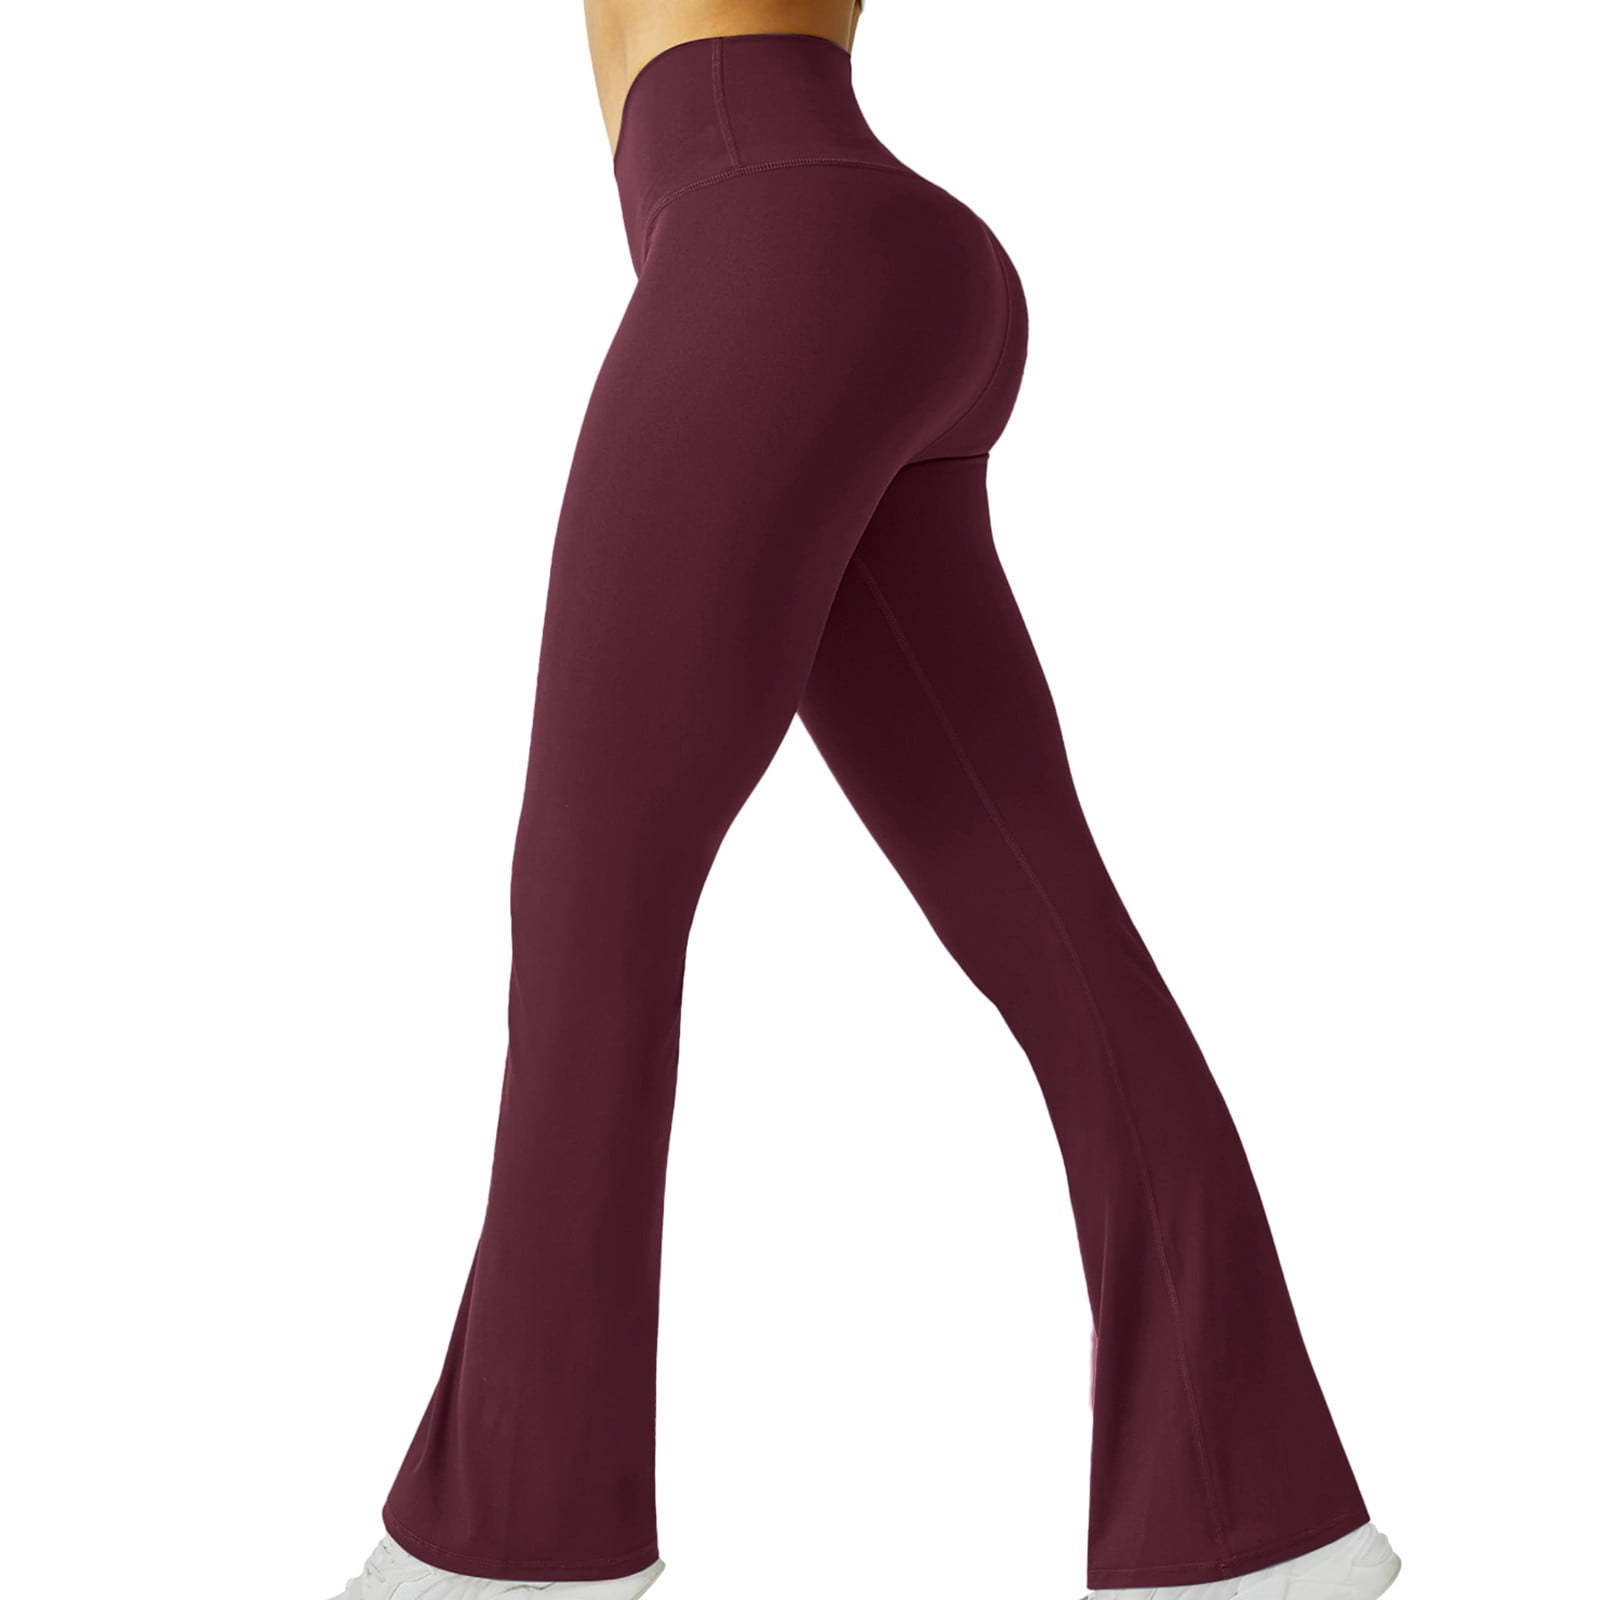 WYMPDSVI High Waisted Womens Leggings Sexy Butt Lifting Tights Soft ...